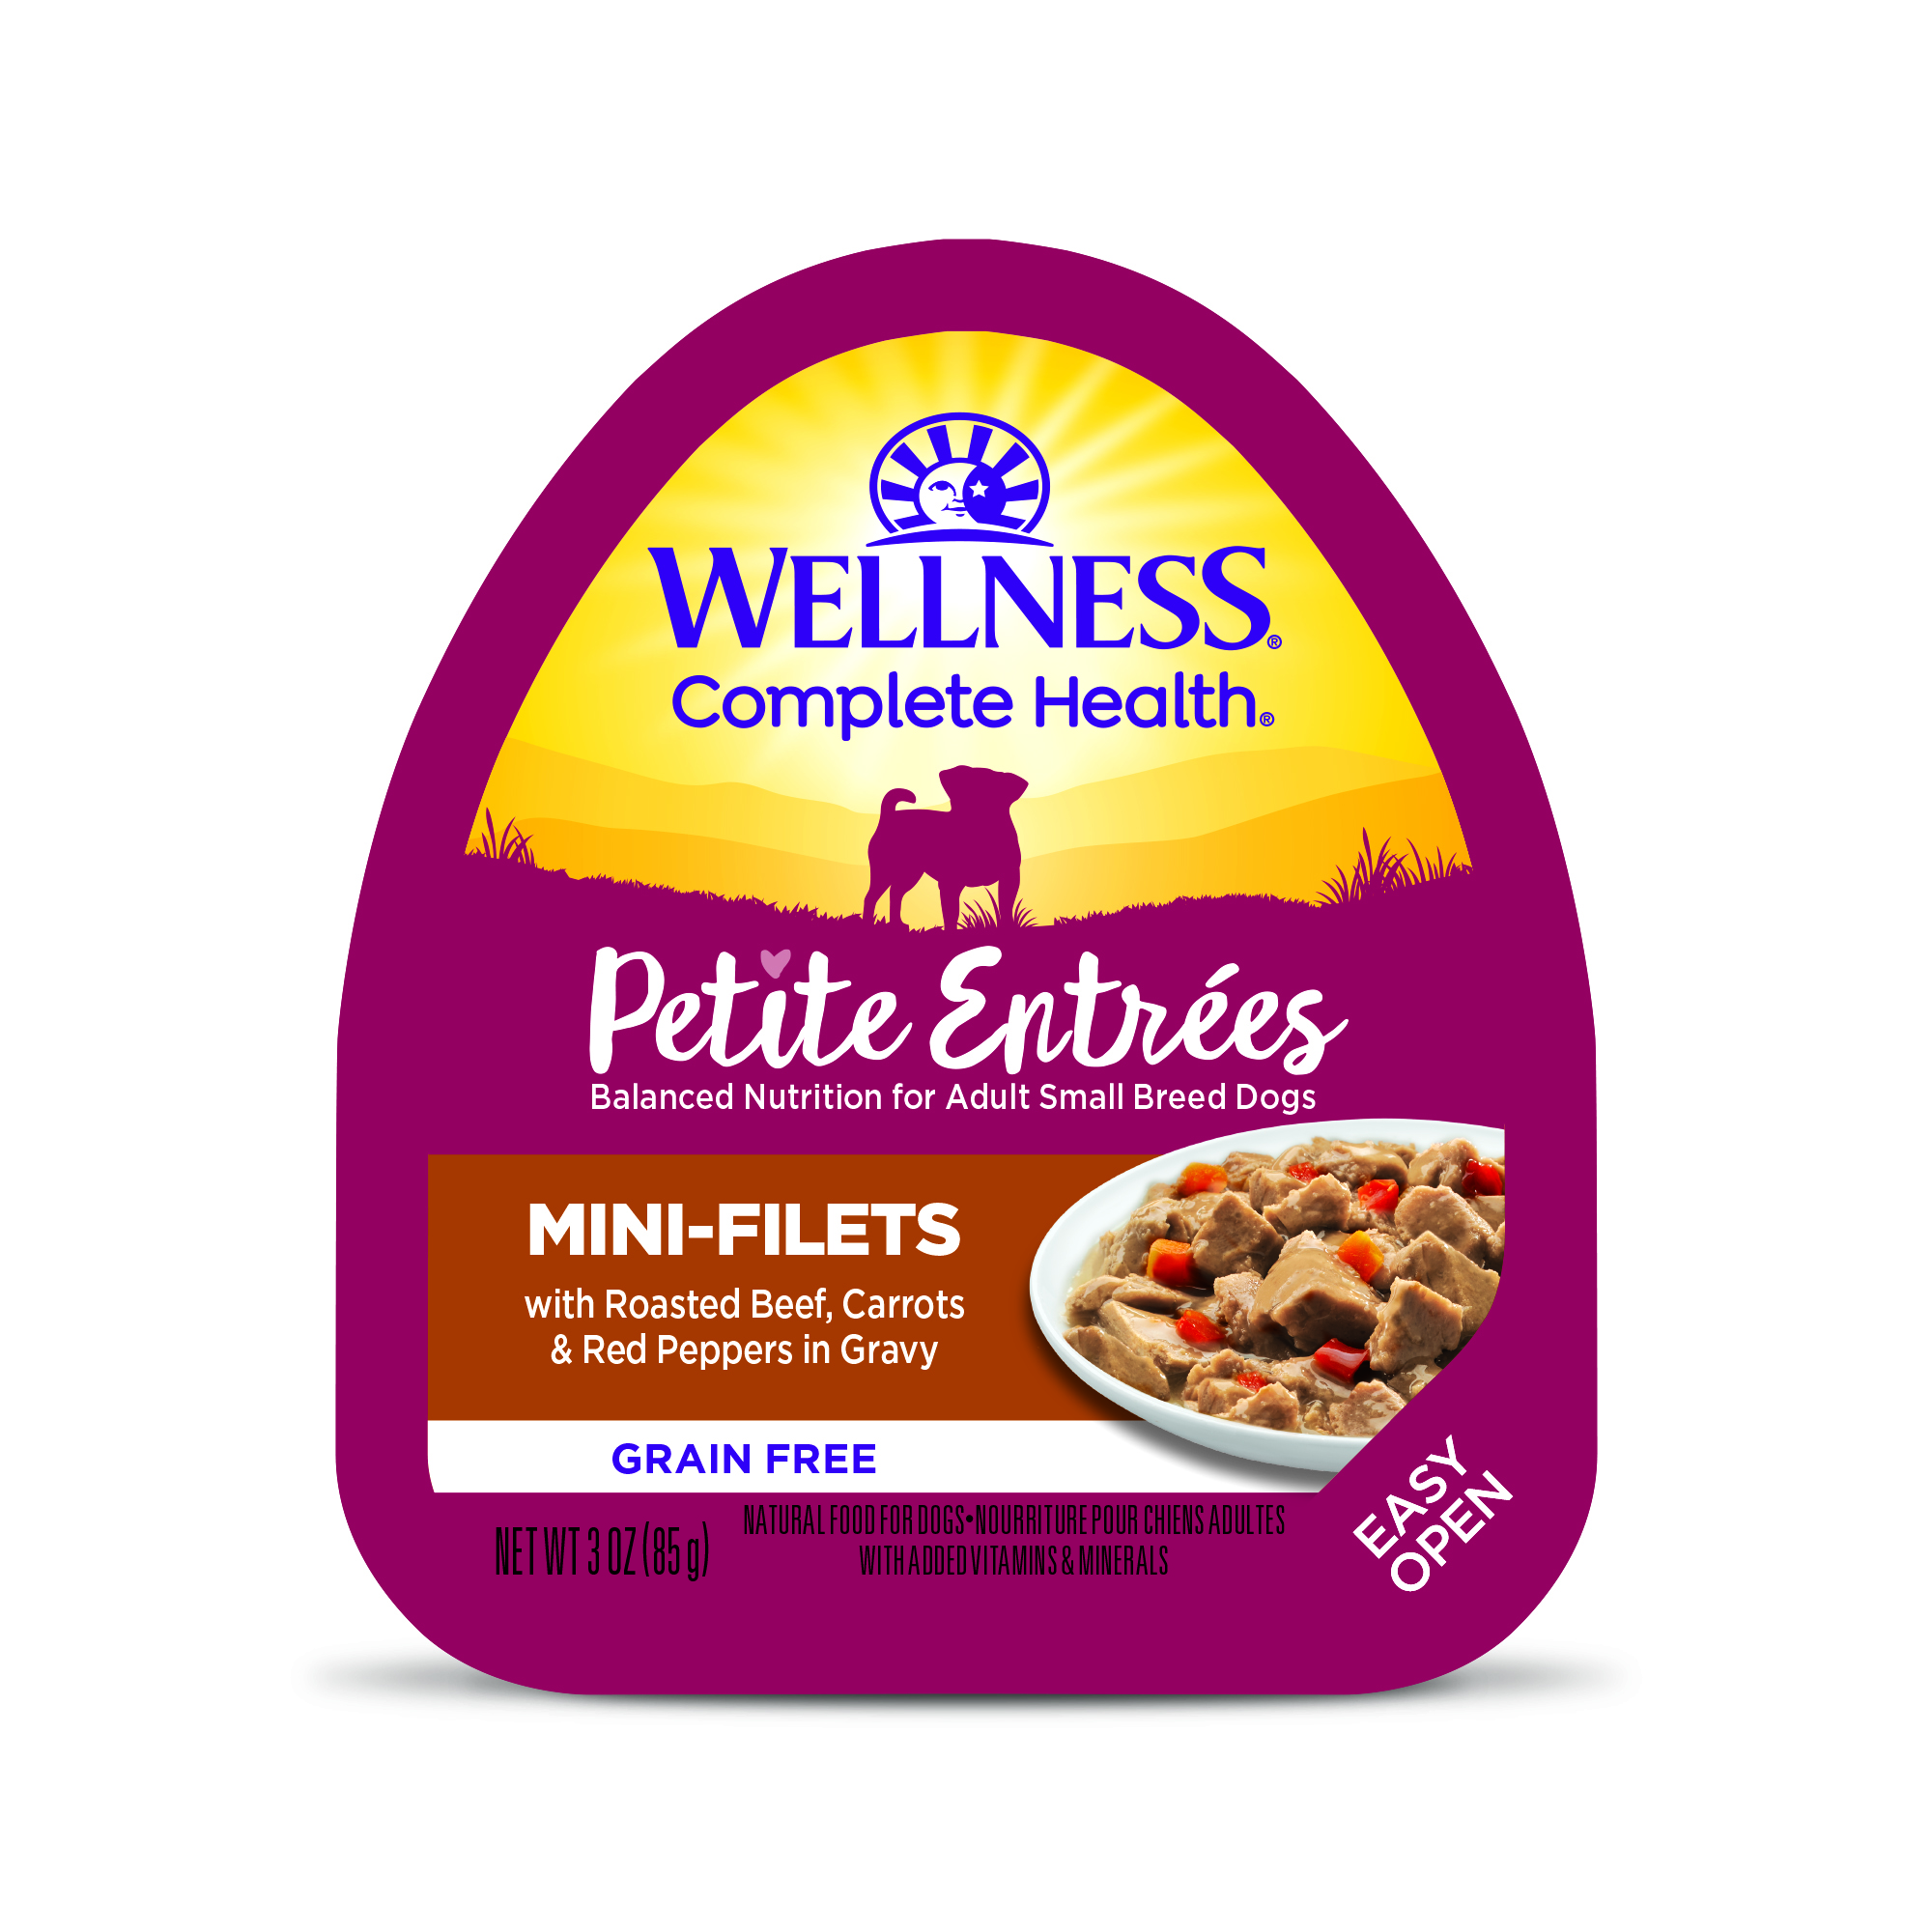 Wellness Complete Health Petite Entrées Mini Fillets Roasted Beef, Carrots & Red Peppers